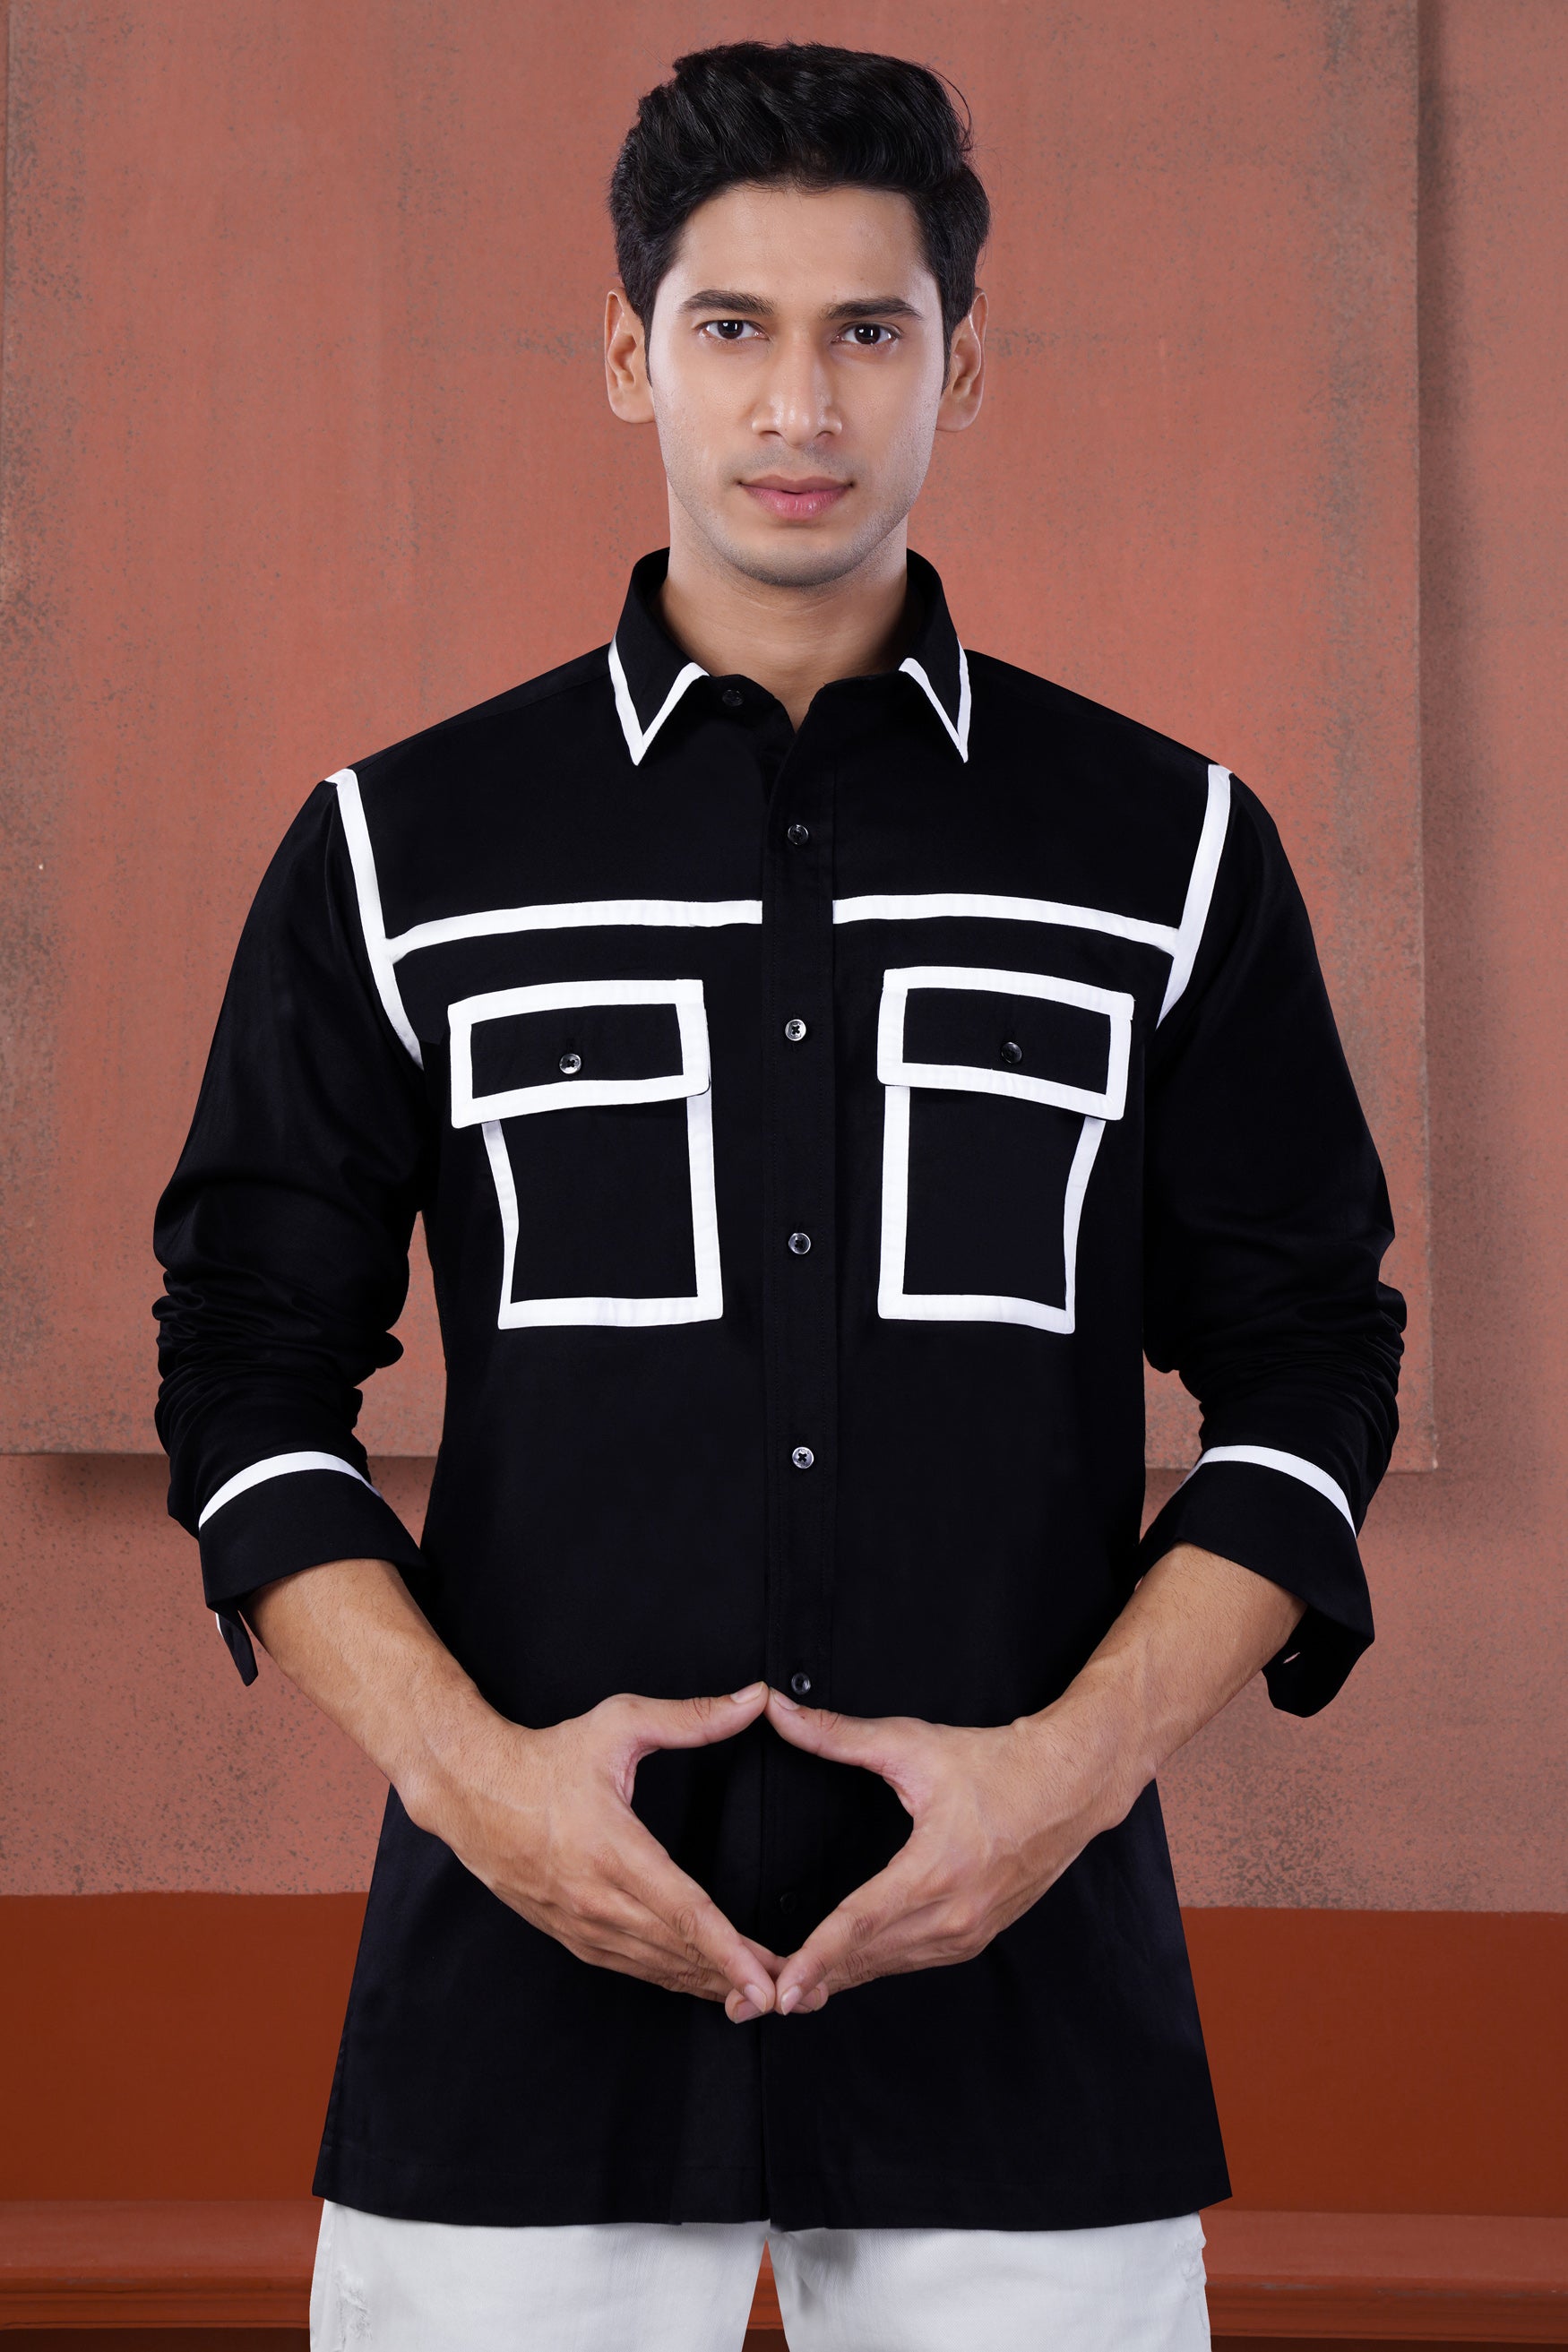 Jade Black with White Borders Royal Oxford Designer Shirt 11925-BLK-P490-38, 11925-BLK-P490-H-38, 11925-BLK-P490-39, 11925-BLK-P490-H-39, 11925-BLK-P490-40, 11925-BLK-P490-H-40, 11925-BLK-P490-42, 11925-BLK-P490-H-42, 11925-BLK-P490-44, 11925-BLK-P490-H-44, 11925-BLK-P490-46, 11925-BLK-P490-H-46, 11925-BLK-P490-48, 11925-BLK-P490-H-48, 11925-BLK-P490-50, 11925-BLK-P490-H-50, 11925-BLK-P490-52, 11925-BLK-P490-H-52